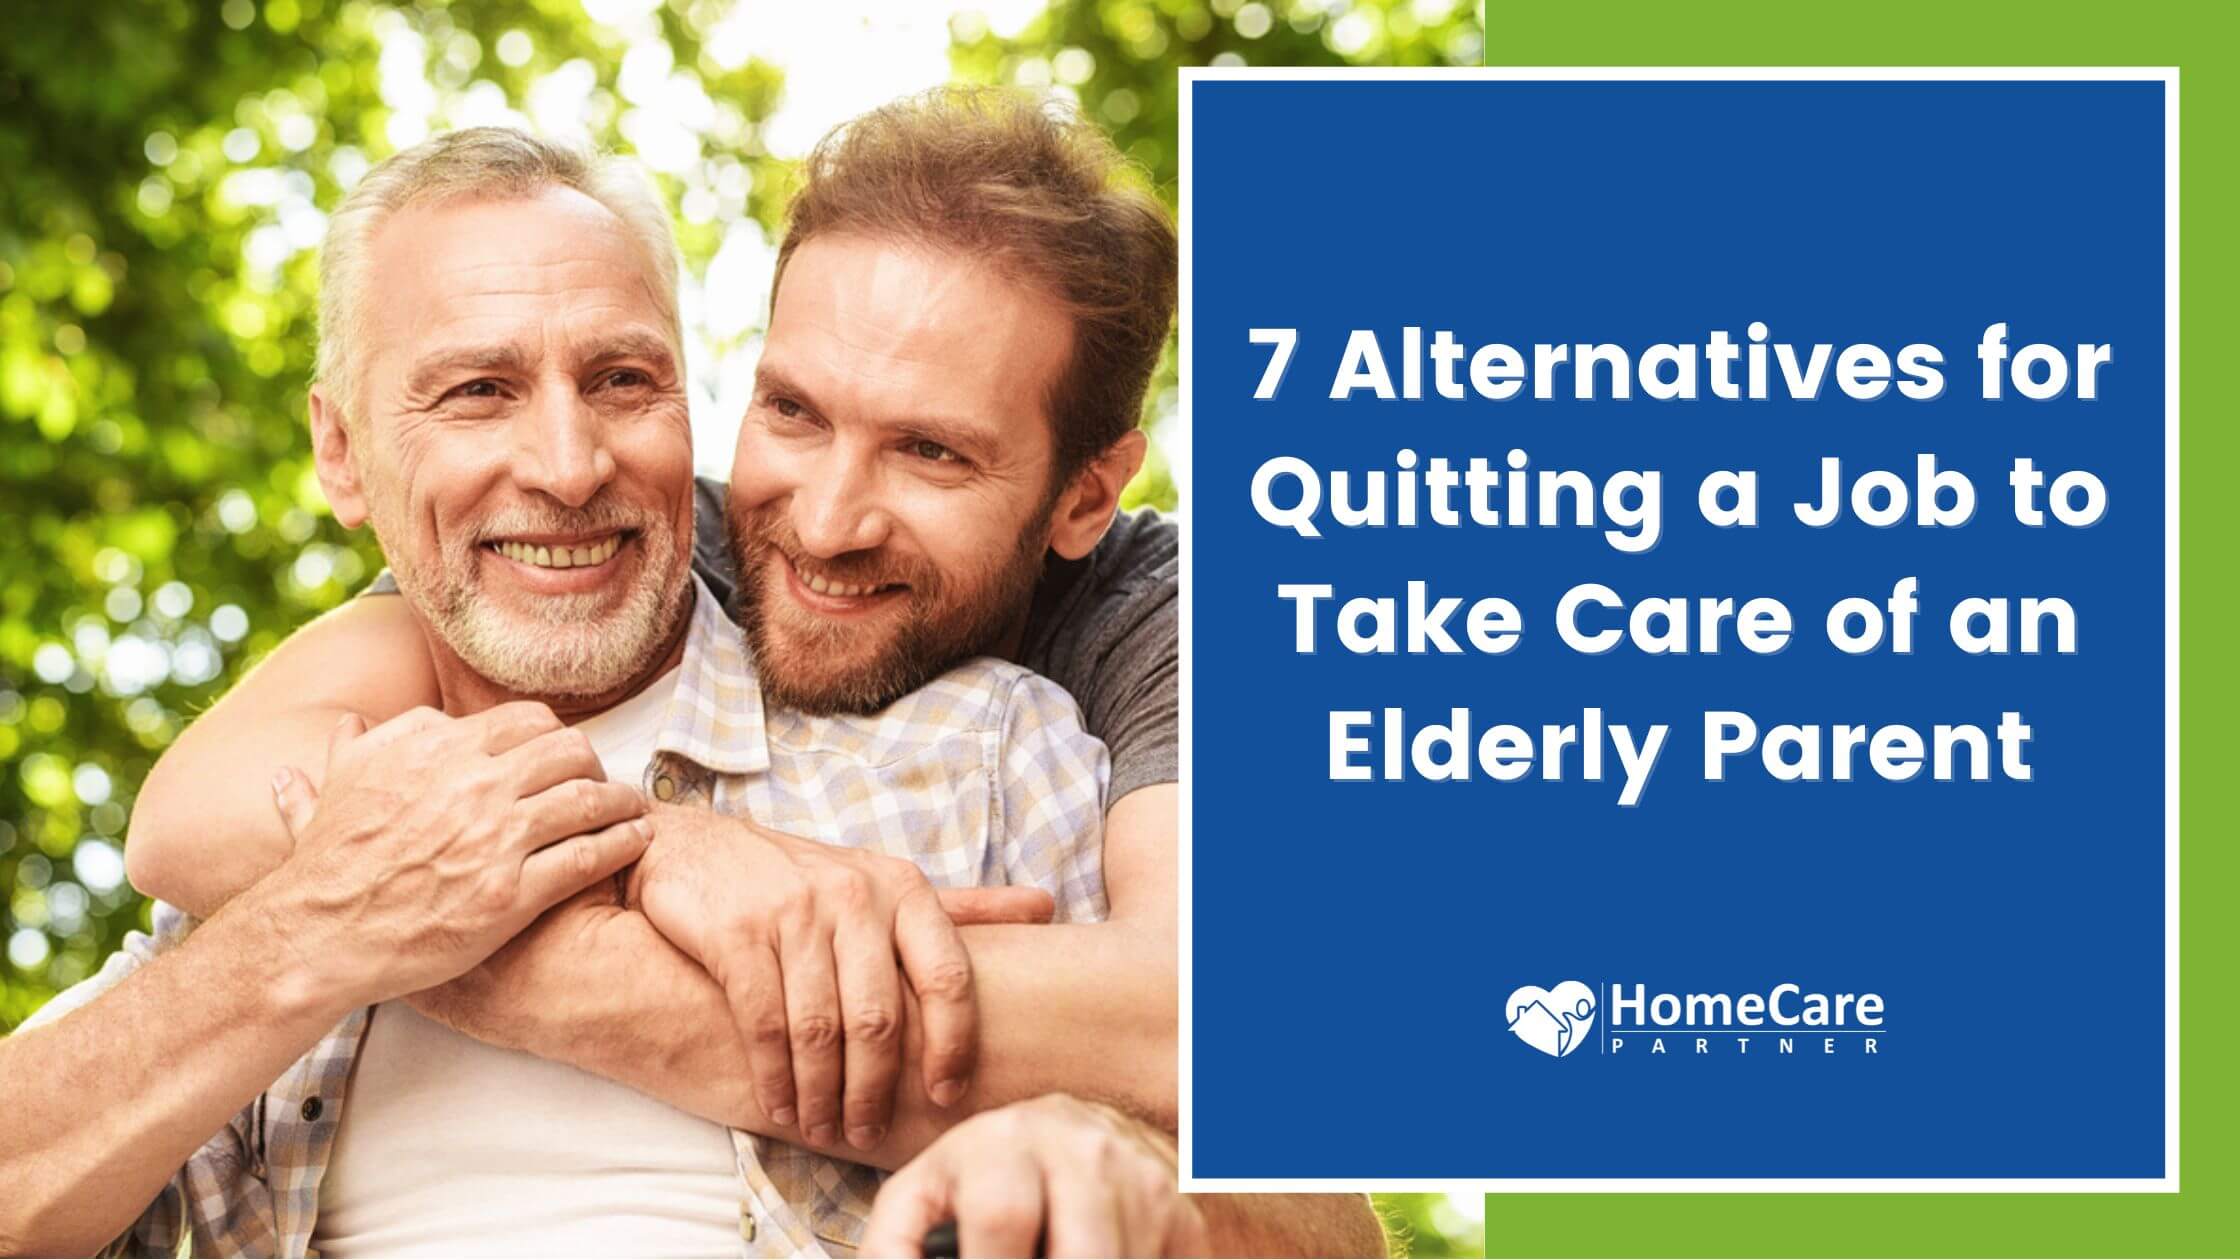 7 Alternatives for Quitting a Job to Take Care of an Elderly Parent